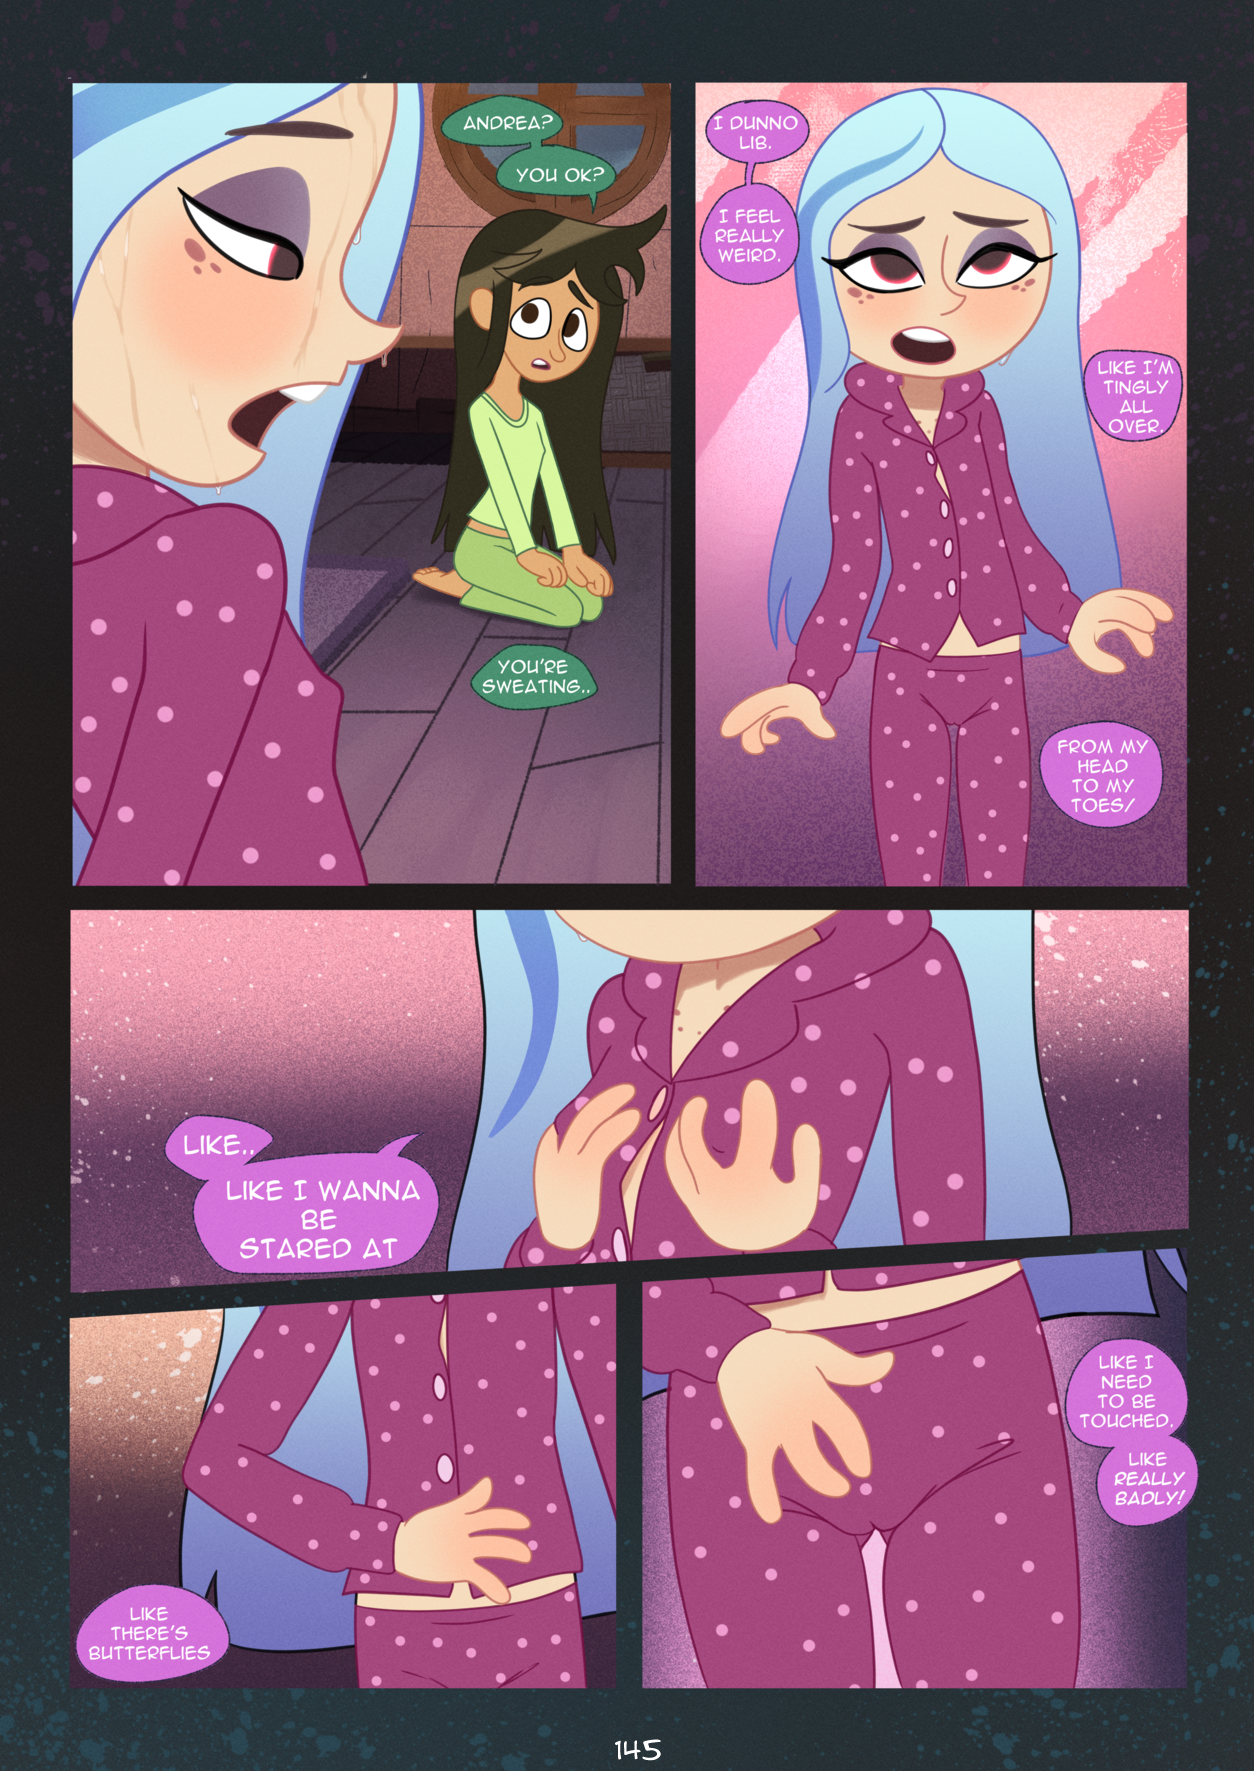 Girls SleepOver - Gone Wrong (Gone Sexual) porn comic picture 7